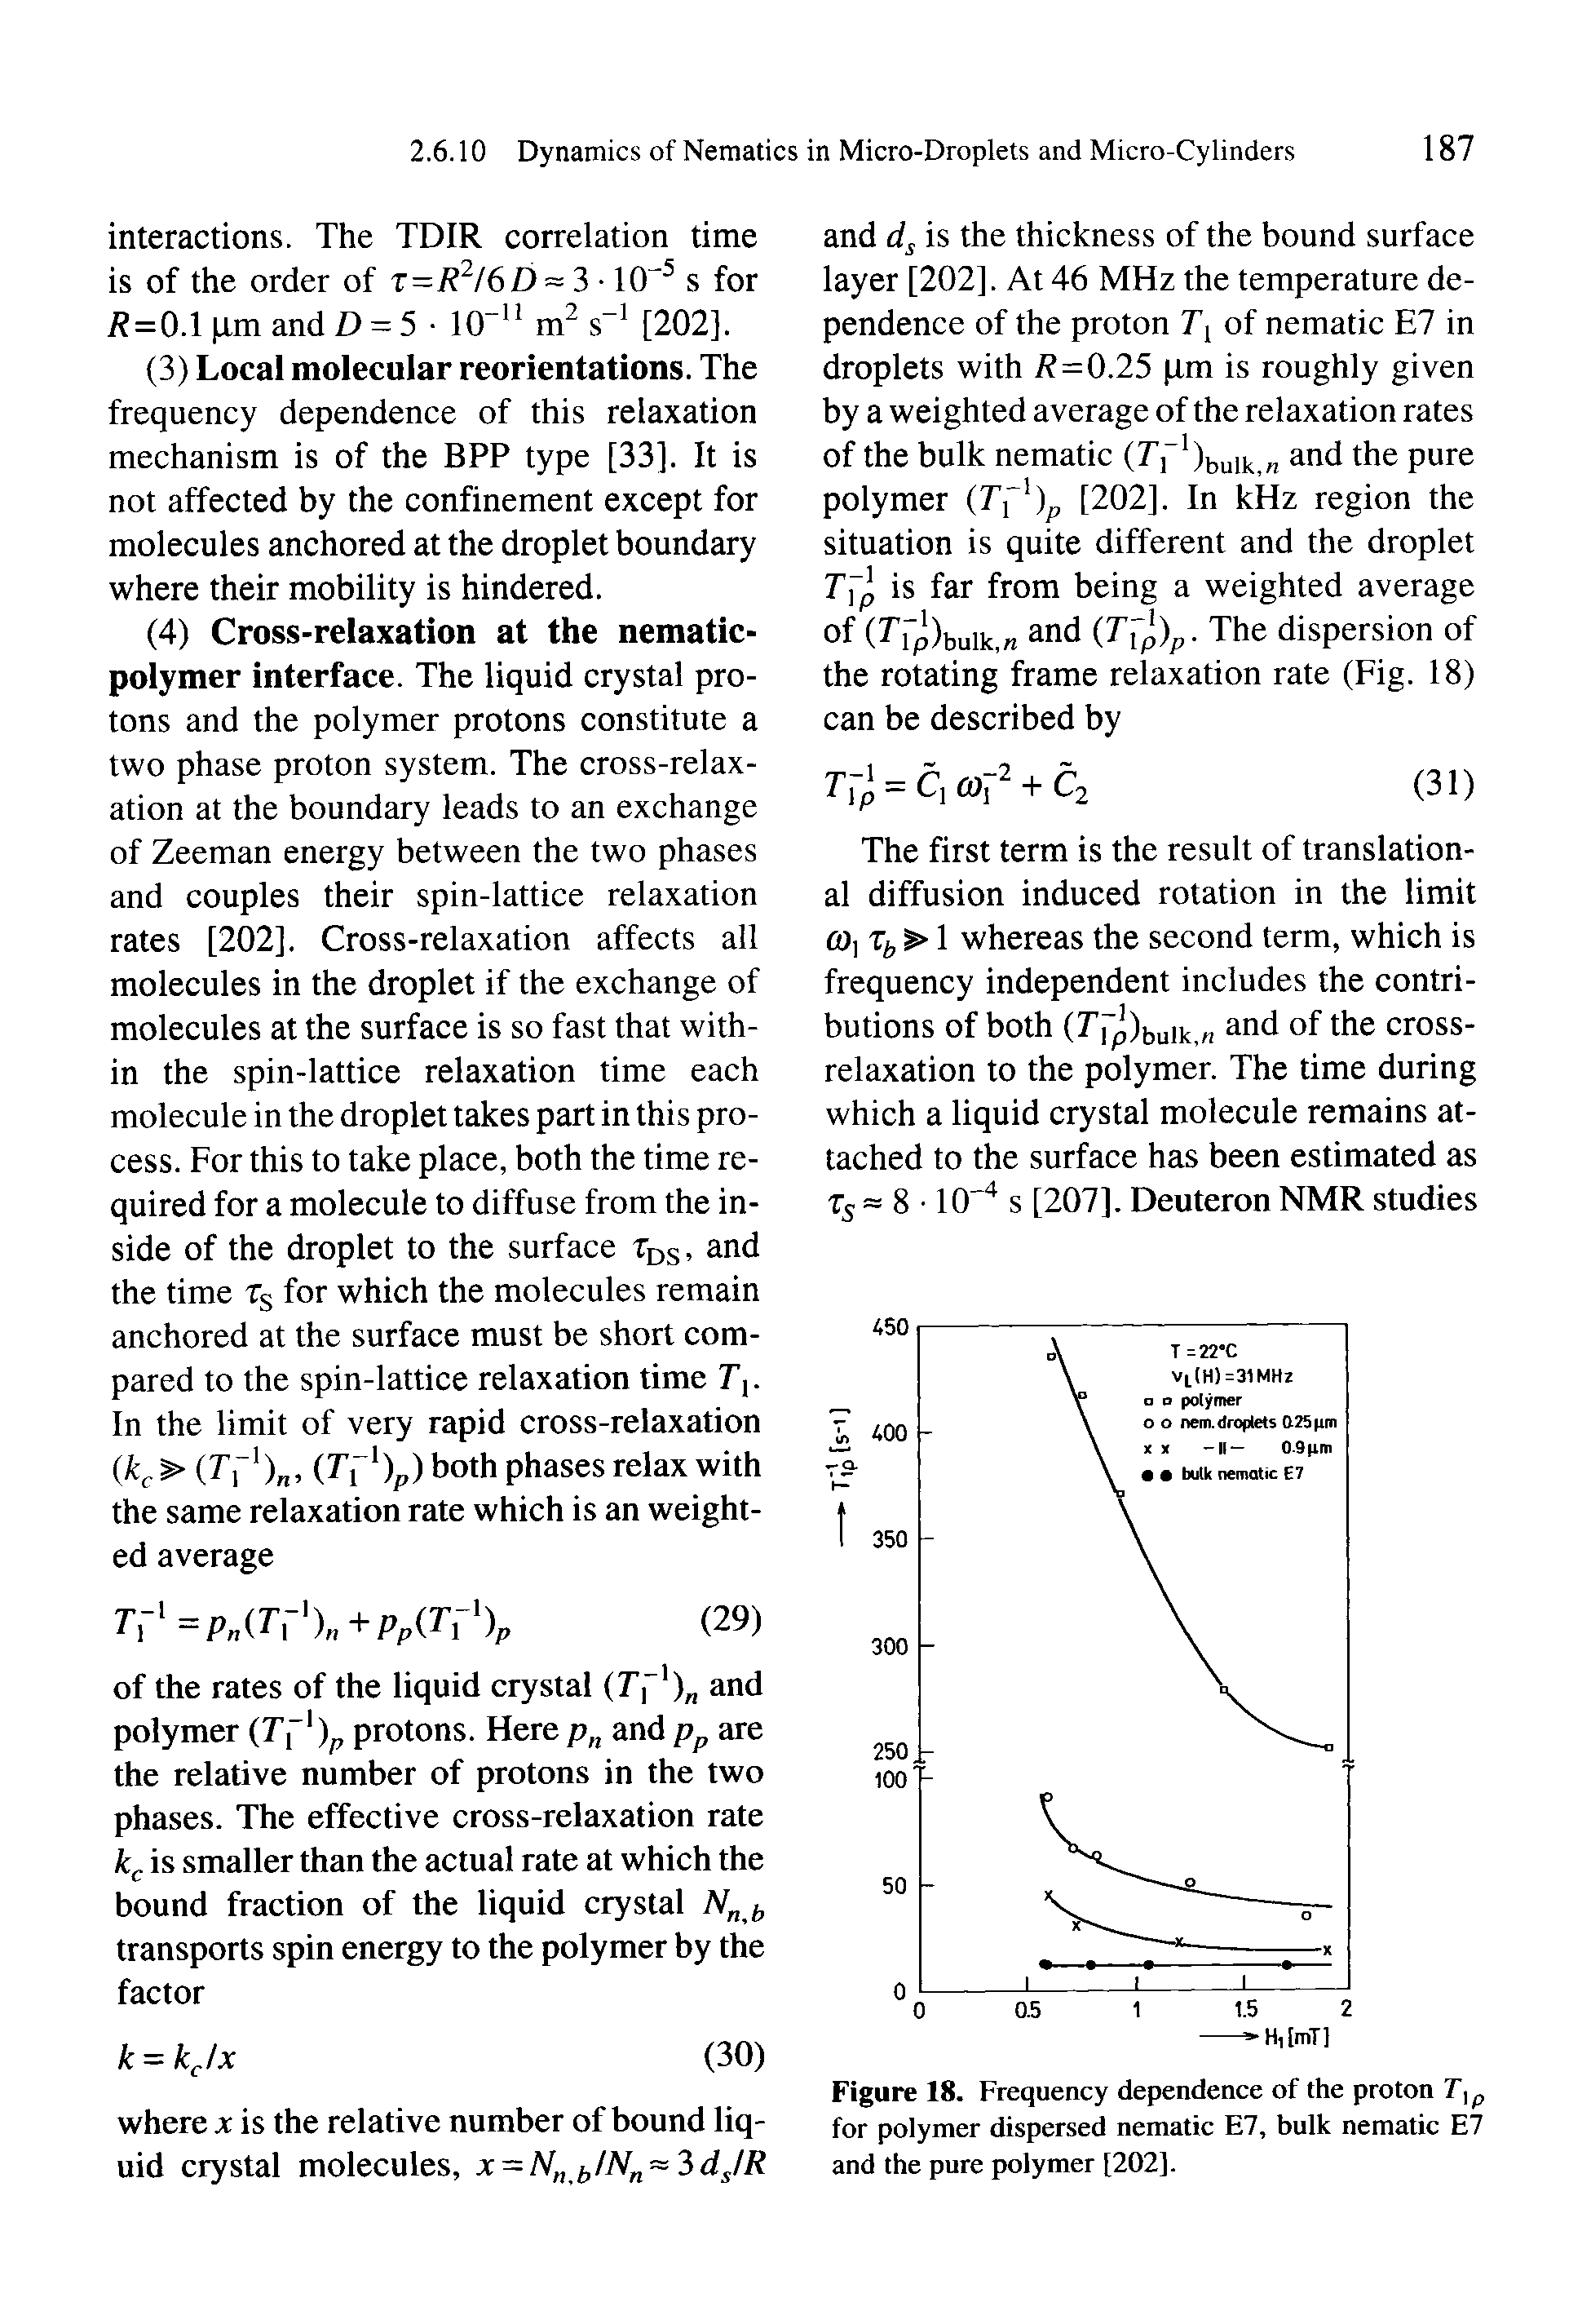 Figure 18. Frequency dependence of the proton T,p for polymer dispersed nematic E7, bulk nematic E7 and the pure polymer [202].